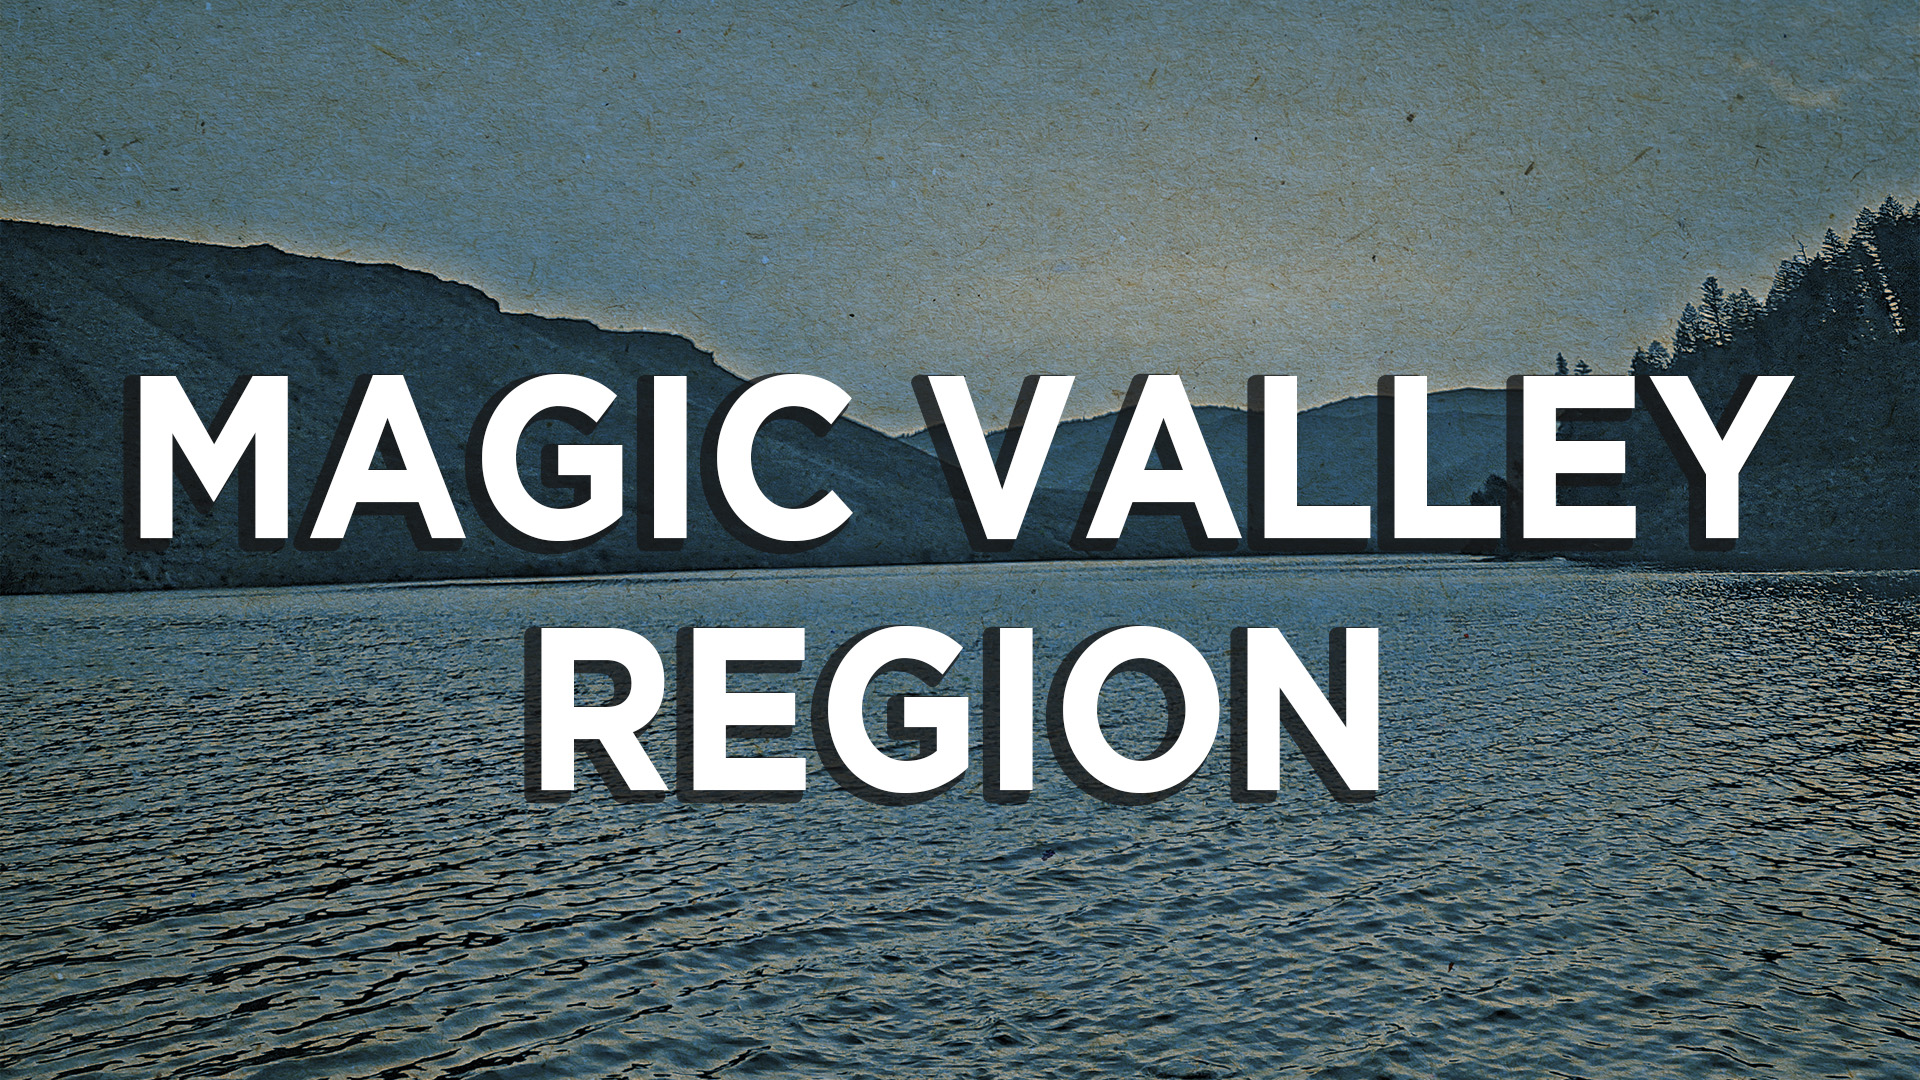 spring-fishing-region-banners-magic-valley